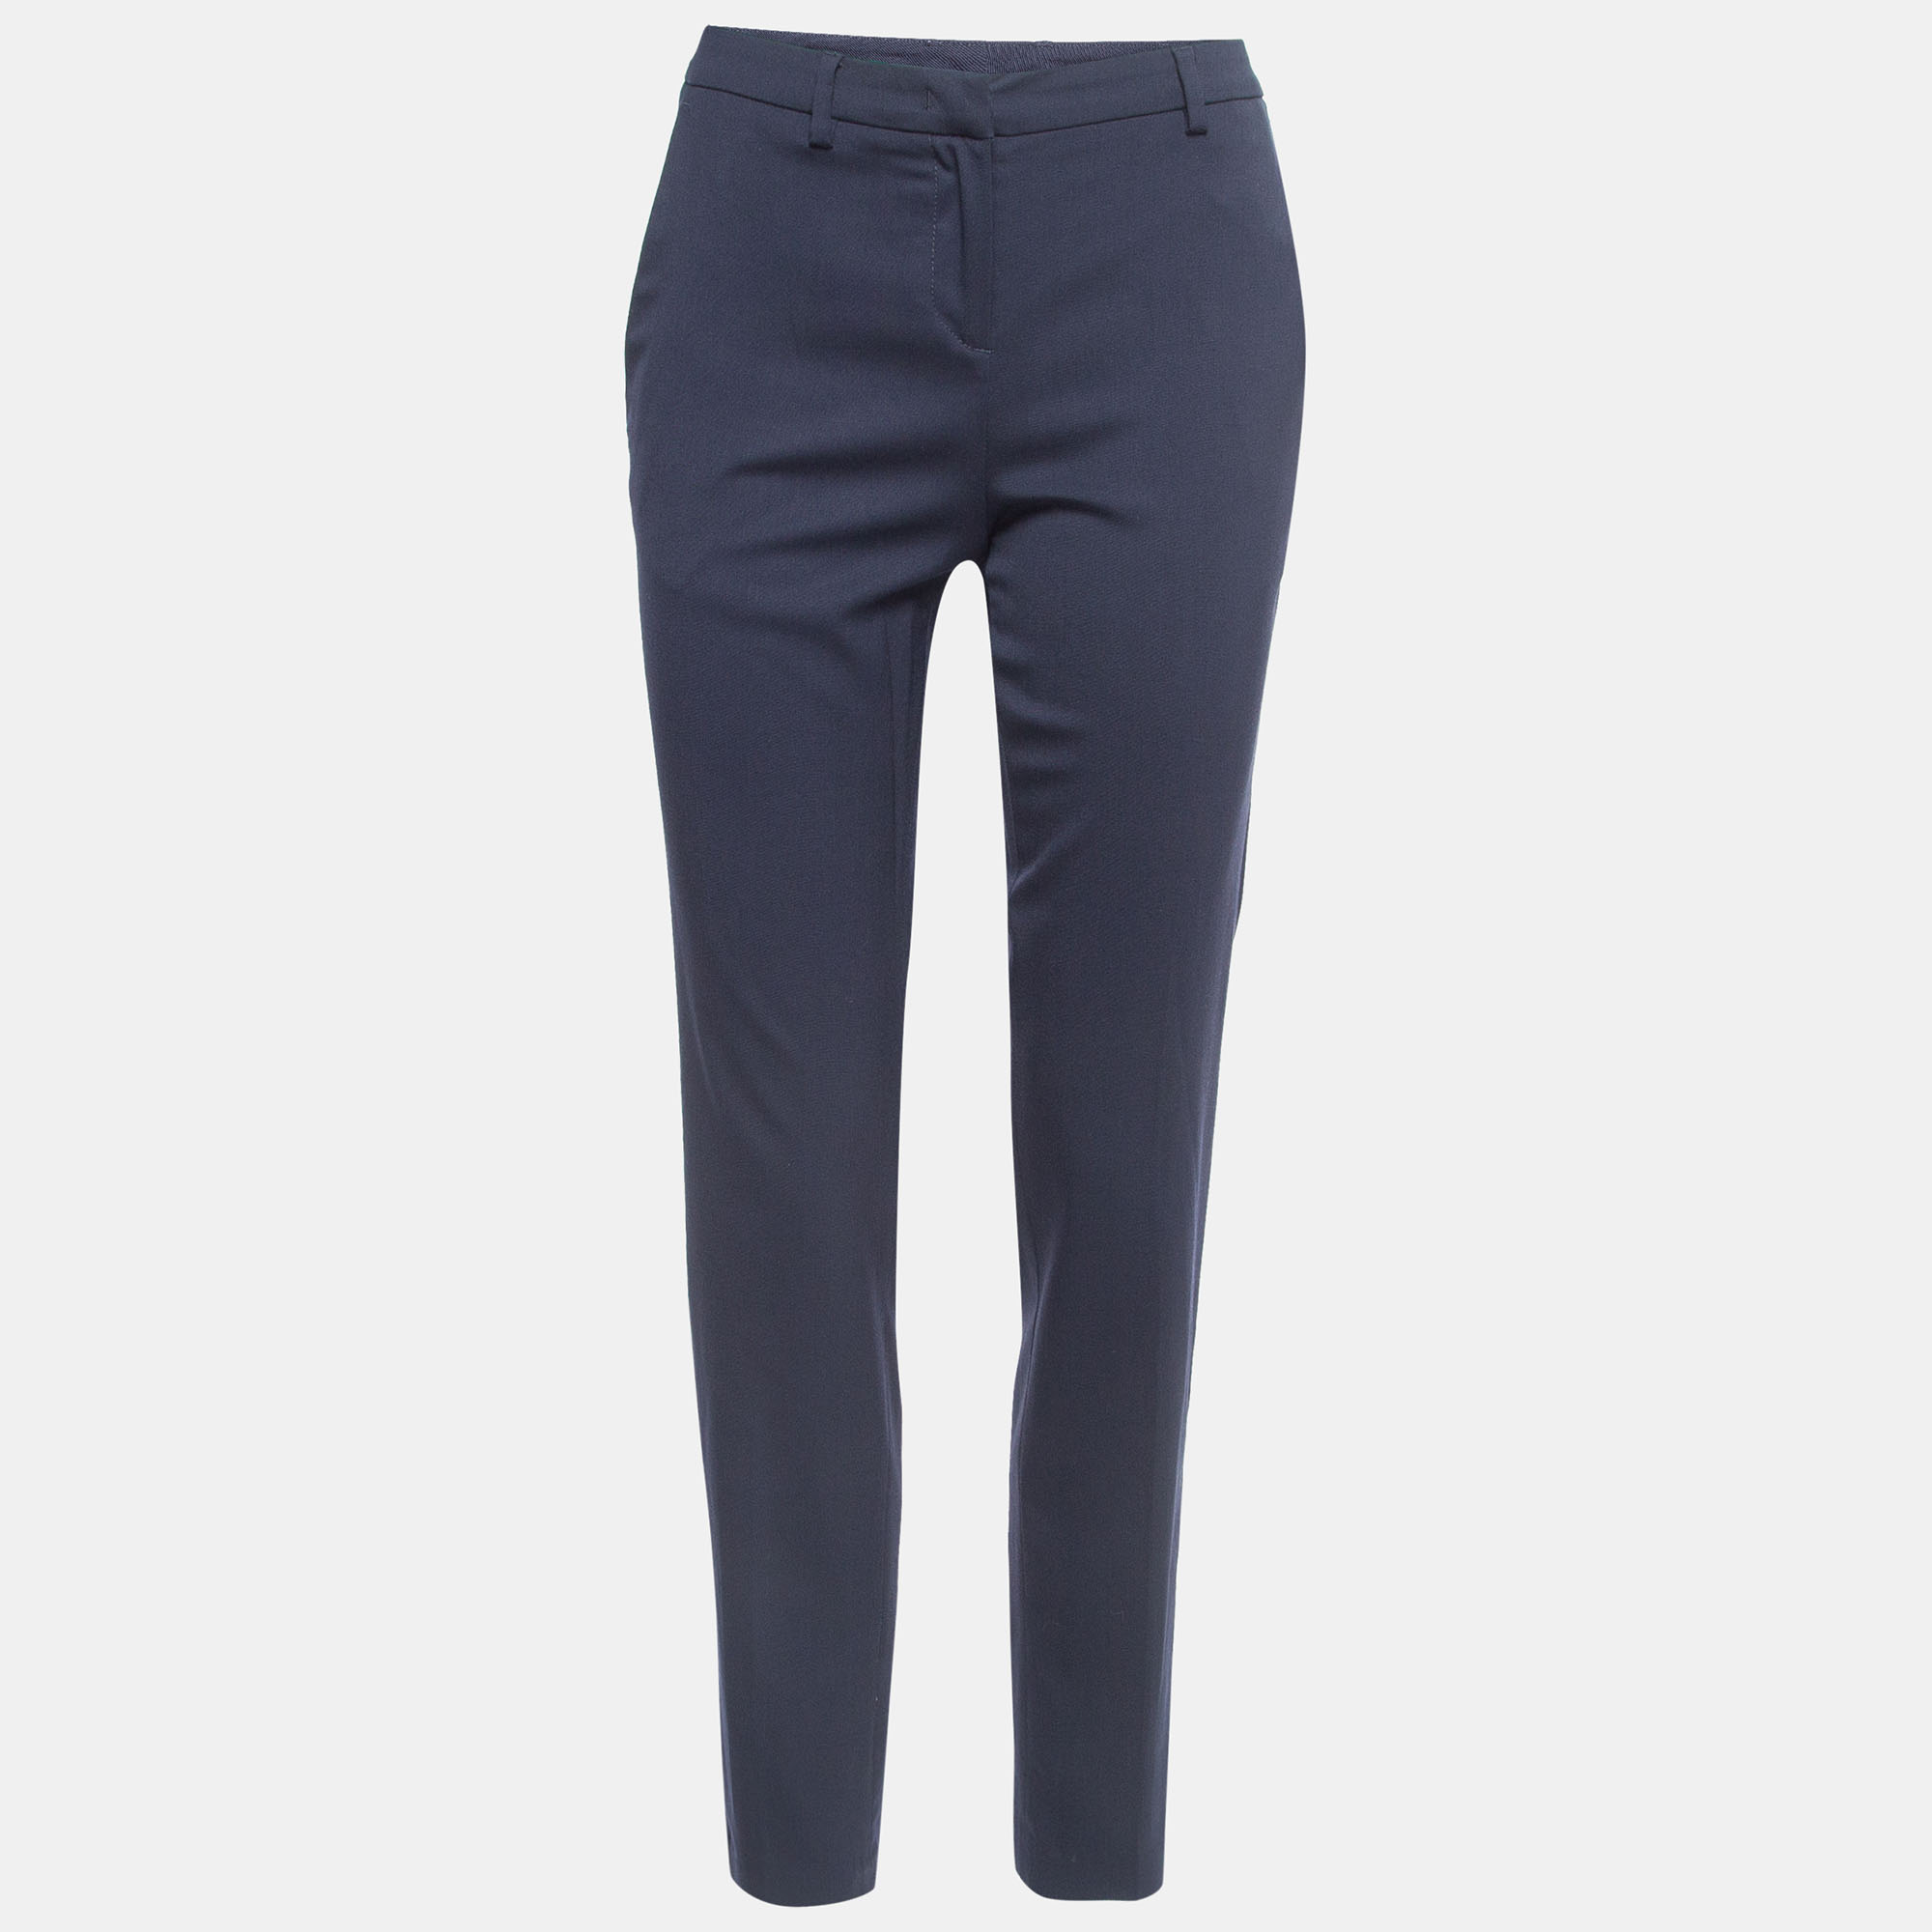 Moncler navy blue wool blend formal trousers m